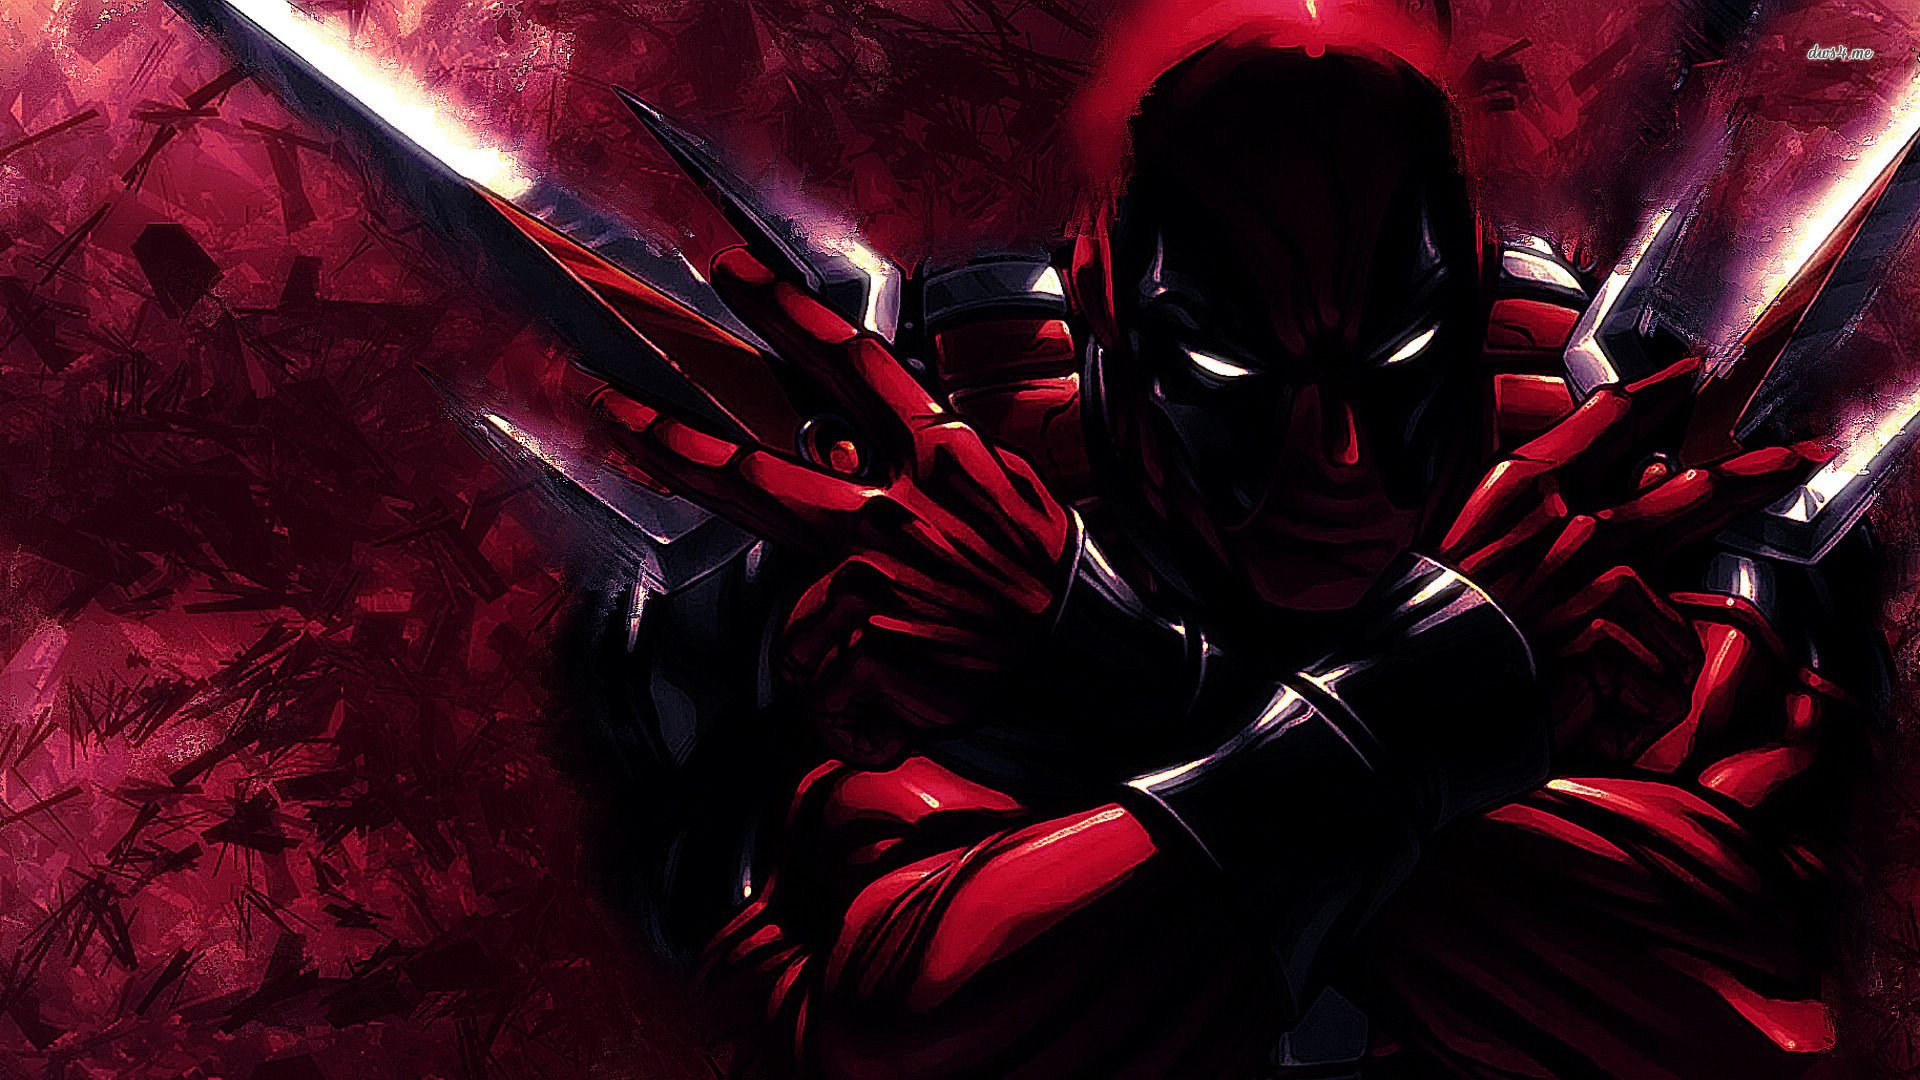 The 'Deadpool' Movie Is Still Alive According To X Men Producer!